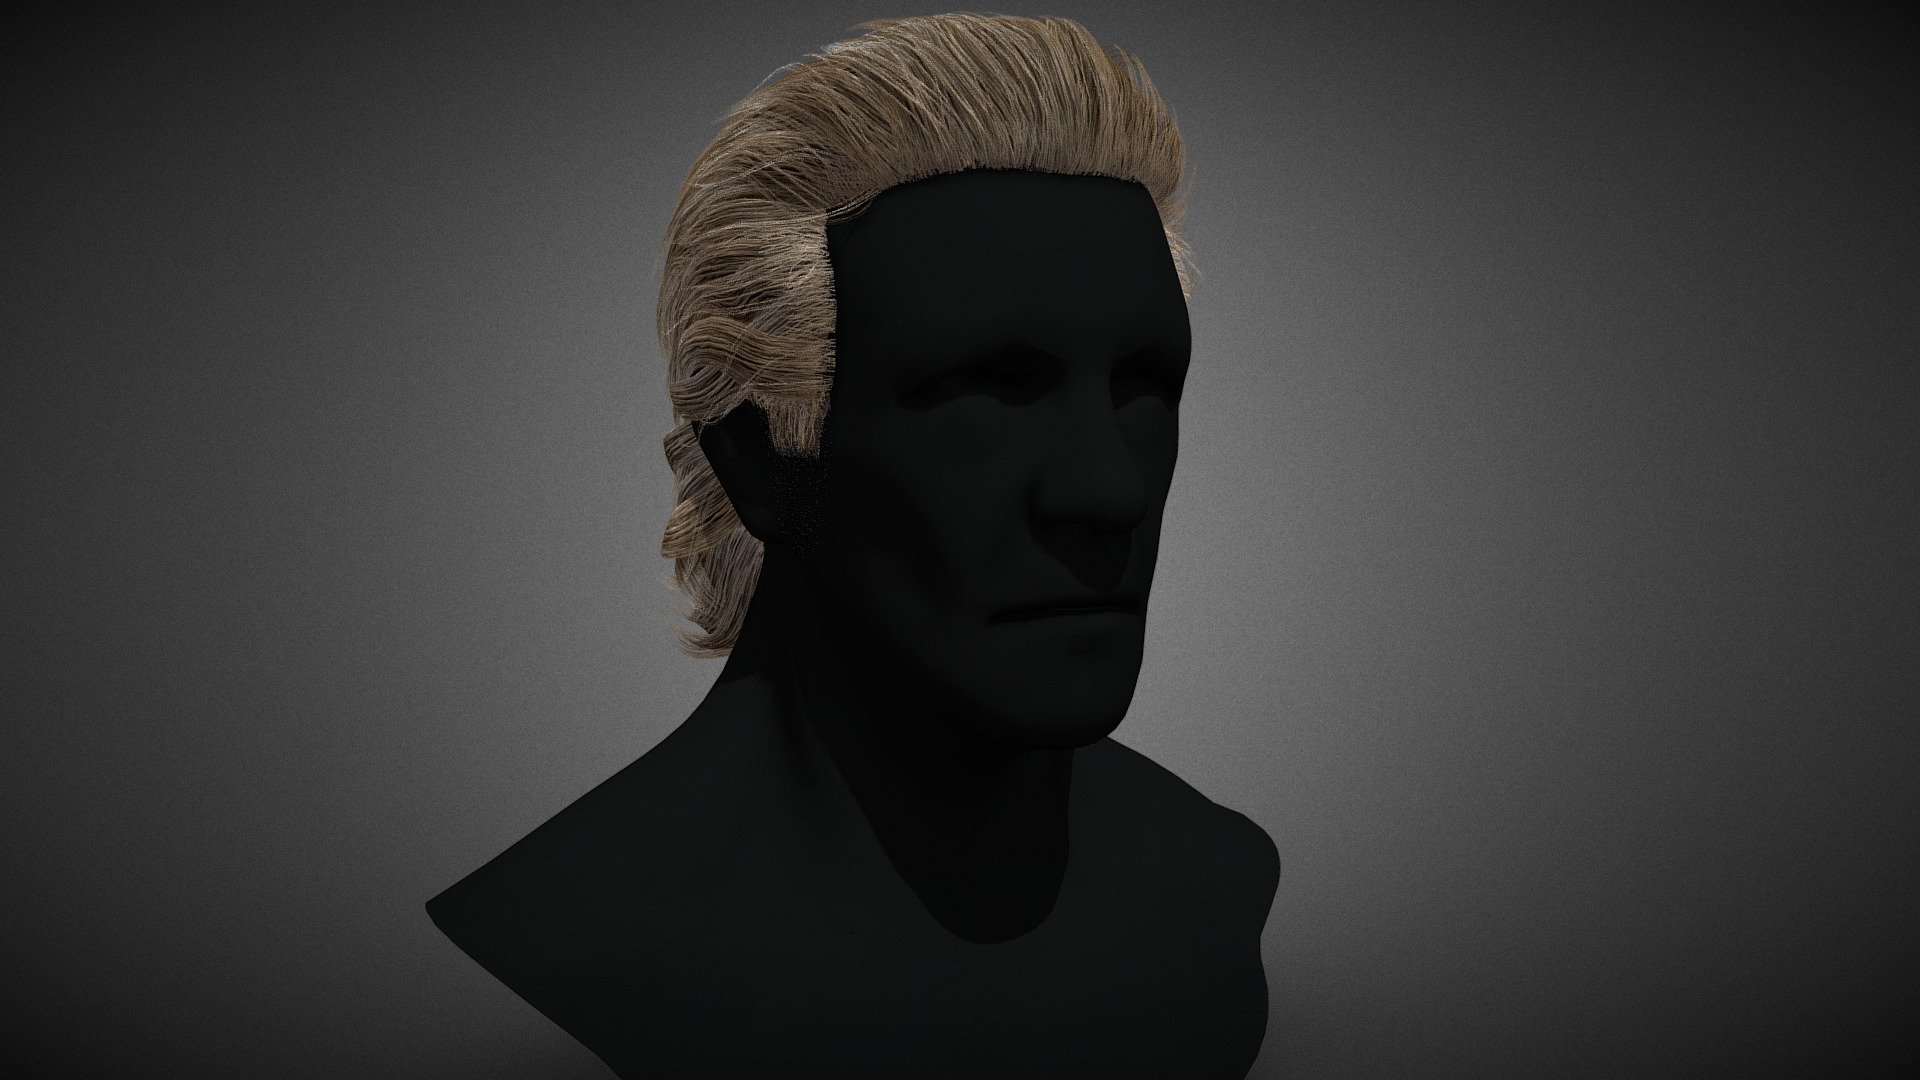 CG StudioX Present :
Male Hair Cards Style 1 - Medium Hair lowpoly/PBR




The photo been rendered using Marmoset Toolbag 4 (real time game engine )

The head model is decimated to show how the hair looks on the head.


Features :



Comes with Specular and Metalness PBR 4K texture .

Good topology.

Low polygon geometry.

The Model is prefect for game for both Specular workflow as in Unity and Metalness as in Unreal engine .

The model also rendered using Marmoset Toolbag 4 with both Specular and Metalness PBR and also included in the product with the full texture.

The texture can be easily adjustable .


Texture :



One set of UV for the Hair [Albedo -Normal-Metalness -Roughness-Gloss-Specular-Ao-Alpha-Direction ] (4096*4096).

One set of UV for the Cap [Albedo -Normal-Metalness -Roughness-Gloss-Specular-Alpha] (4096*4096).


Files :
Marmoset Toolbag 4 ,Maya,,FBX,glTF,OBj with all the textures.




Contact me for if you have any questions.
 - Male Hair Cards Style 1 - Medium Hair - Buy Royalty Free 3D model by CG StudioX (@CG_StudioX) 3d model